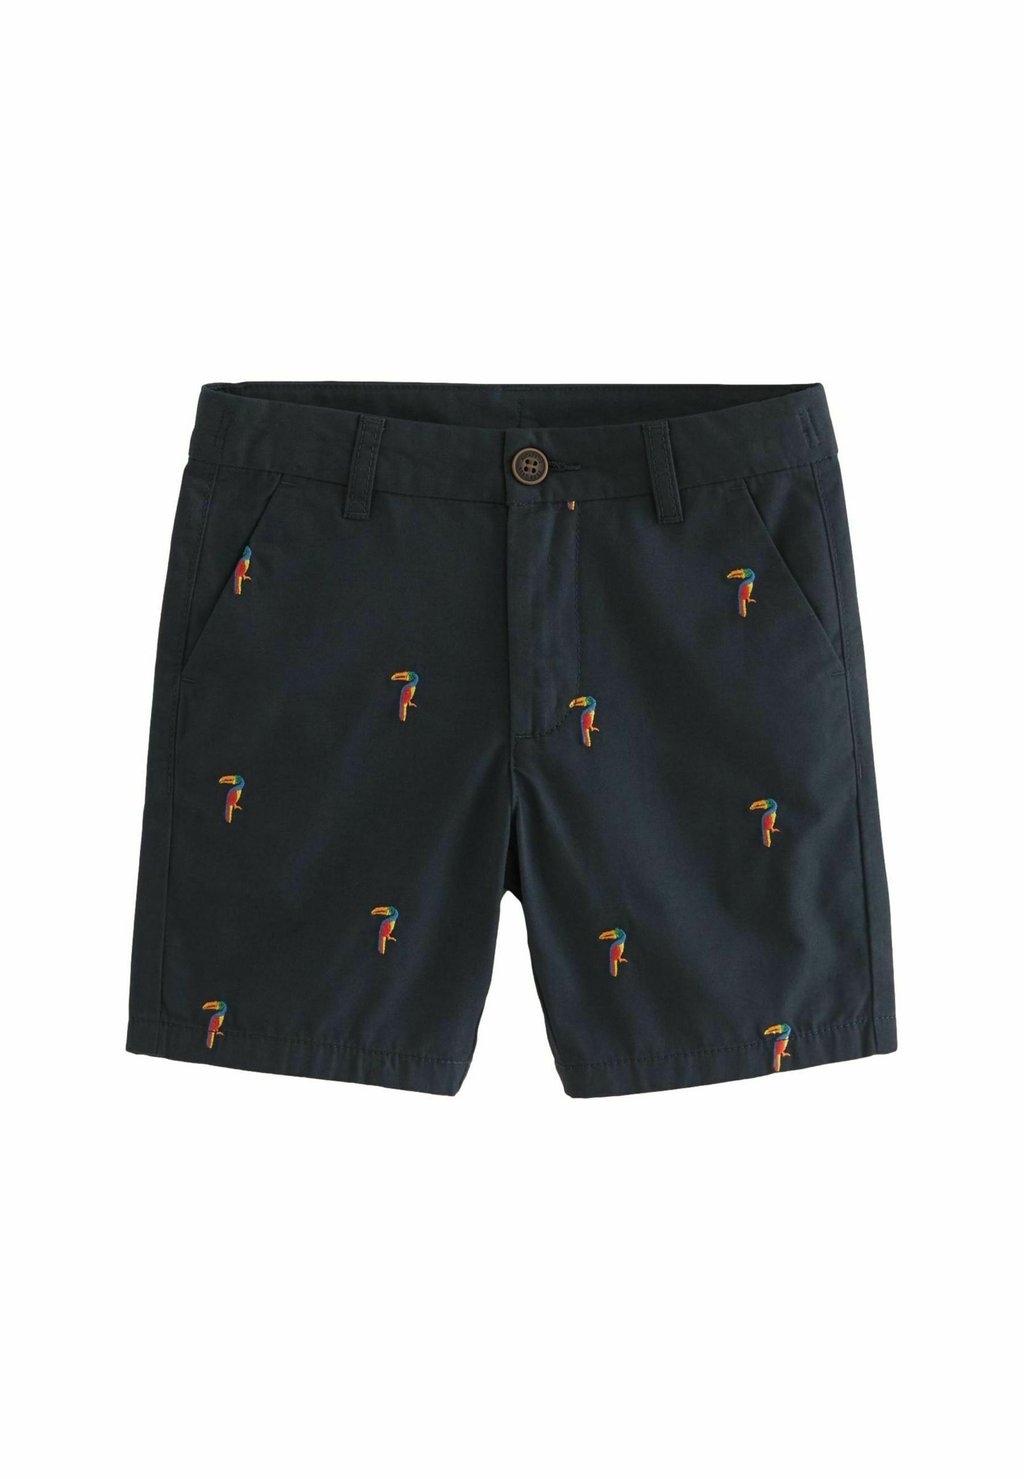 Шорты ALL OVER EMBROIDERY REGULAR FIT Next, цвет navy toucan